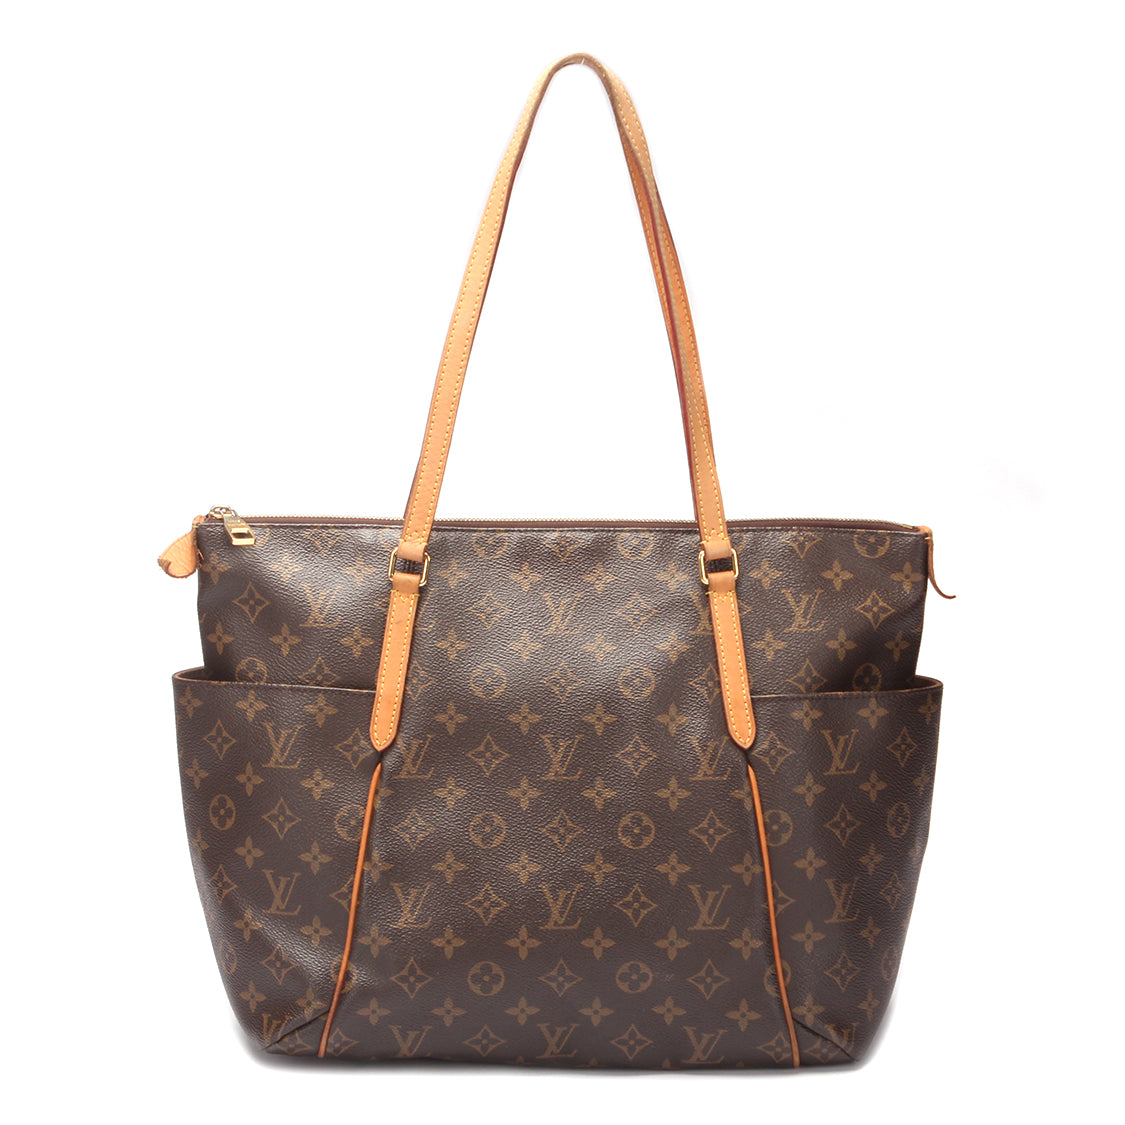 Louis Vuitton Monogram Totally MM  Canvas Tote Bag in Good condition